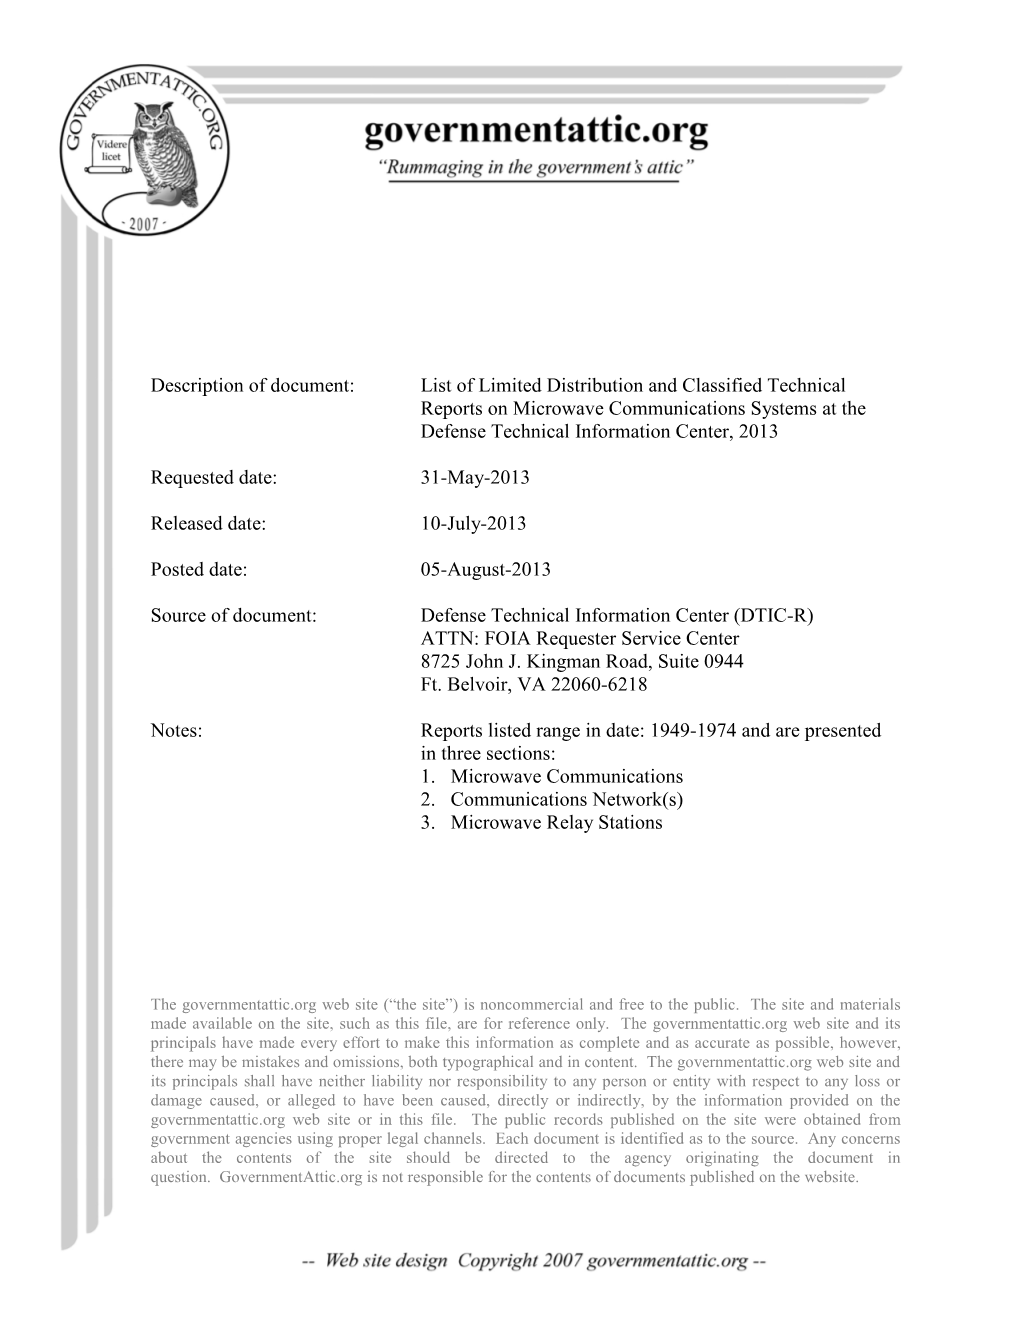 List of Limited Distribution and Classified Technical Reports on Microwave Communications Systems at the Defense Technical Information Center, 2013